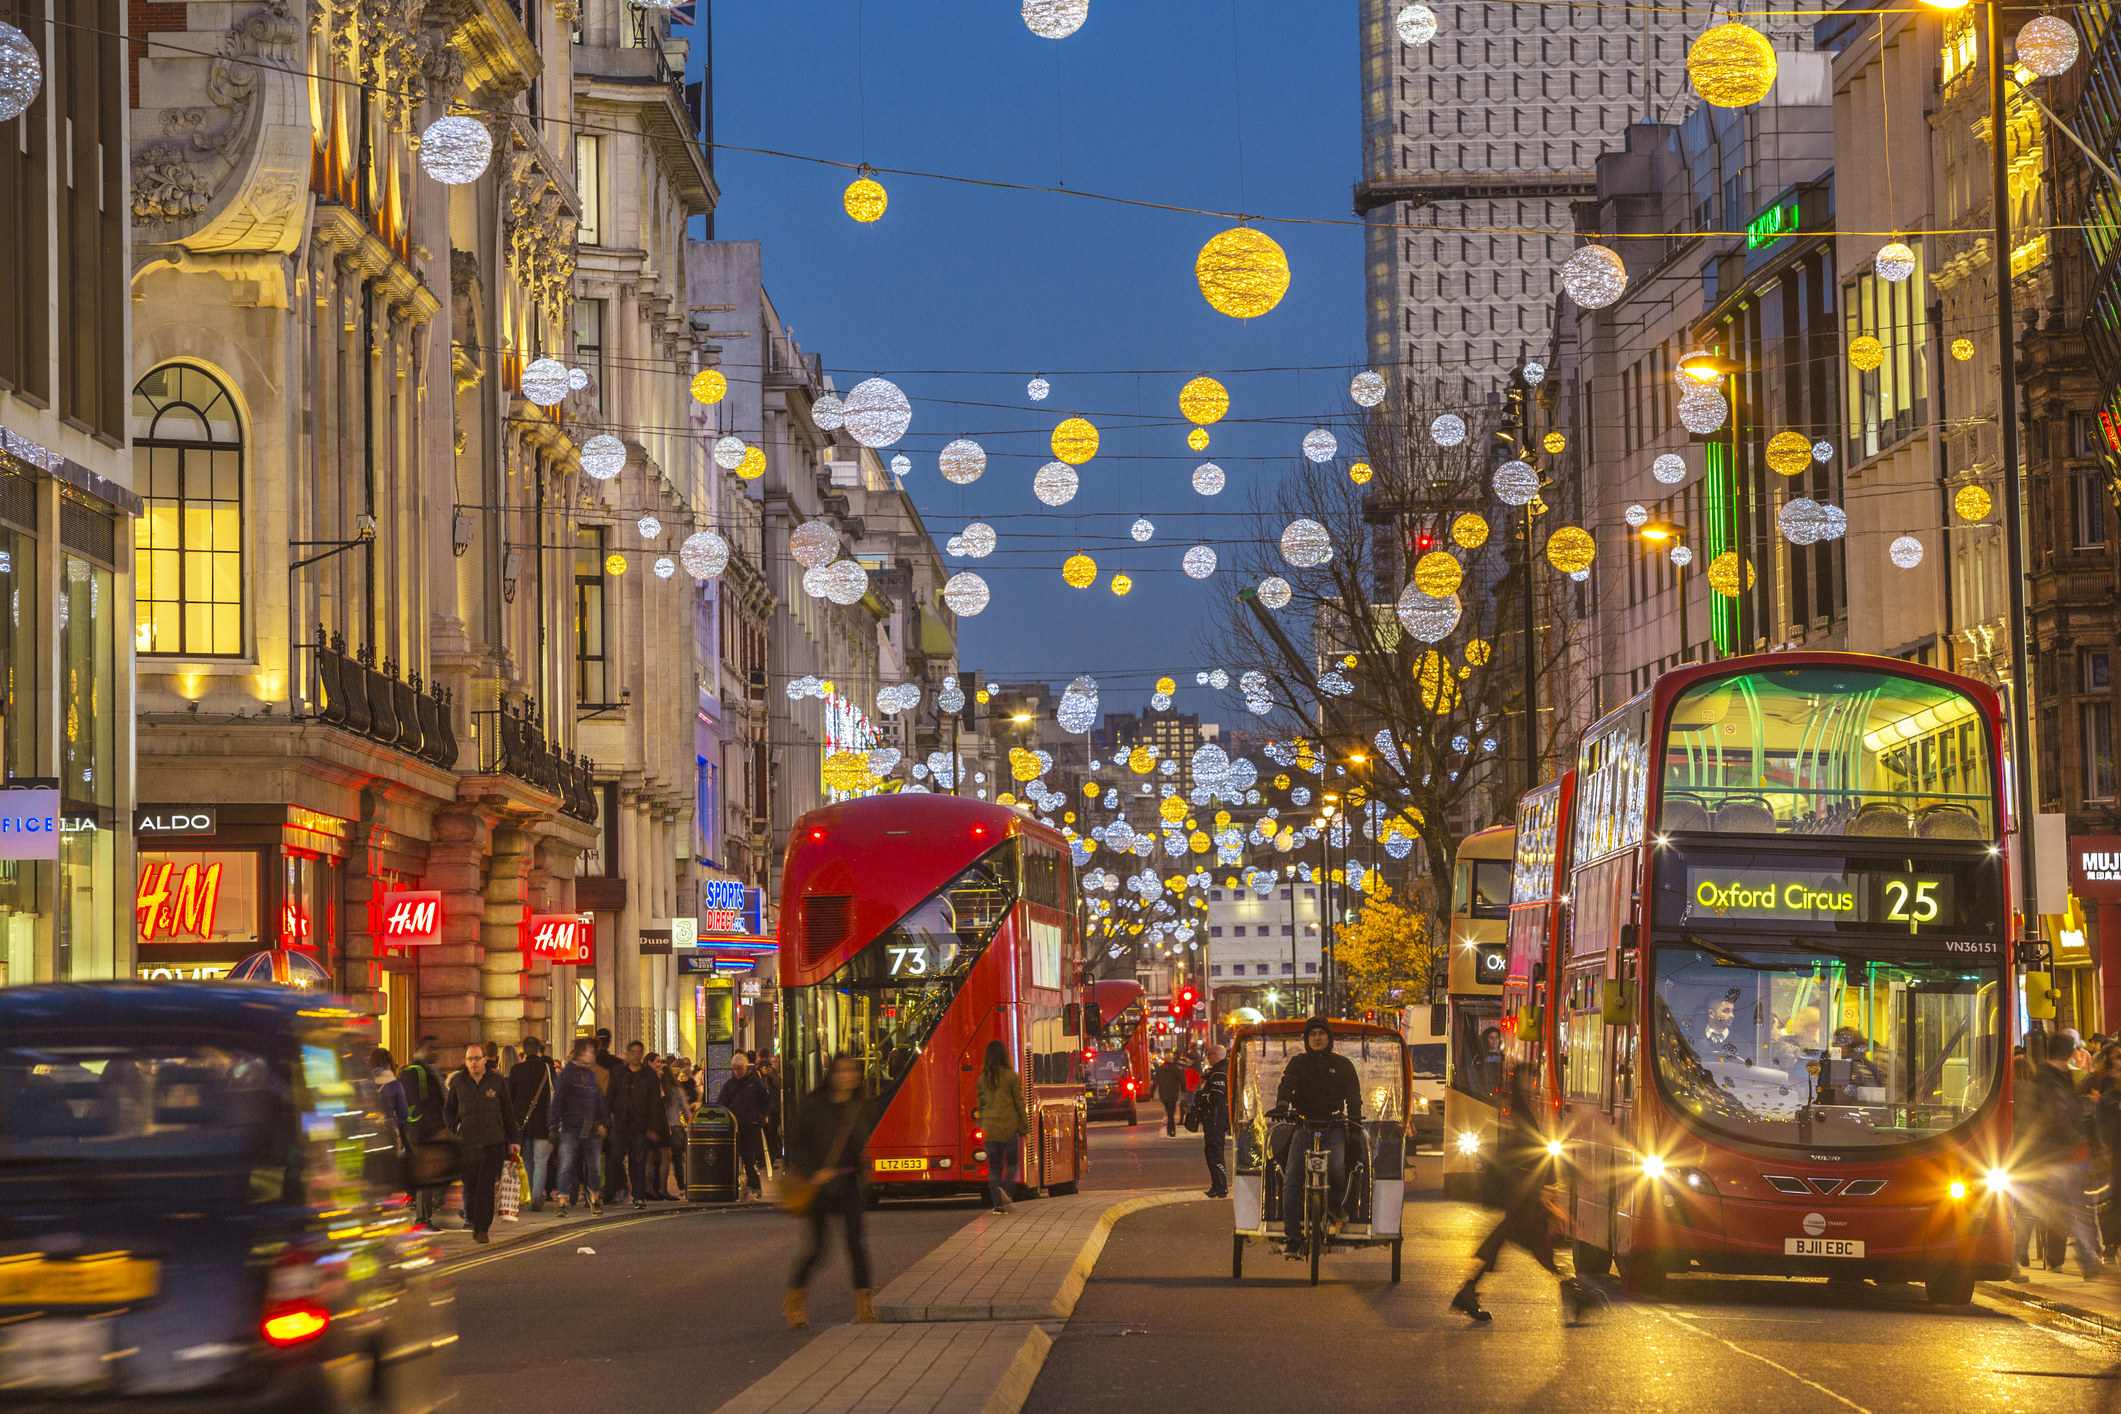 Busses on Oxford Street in London